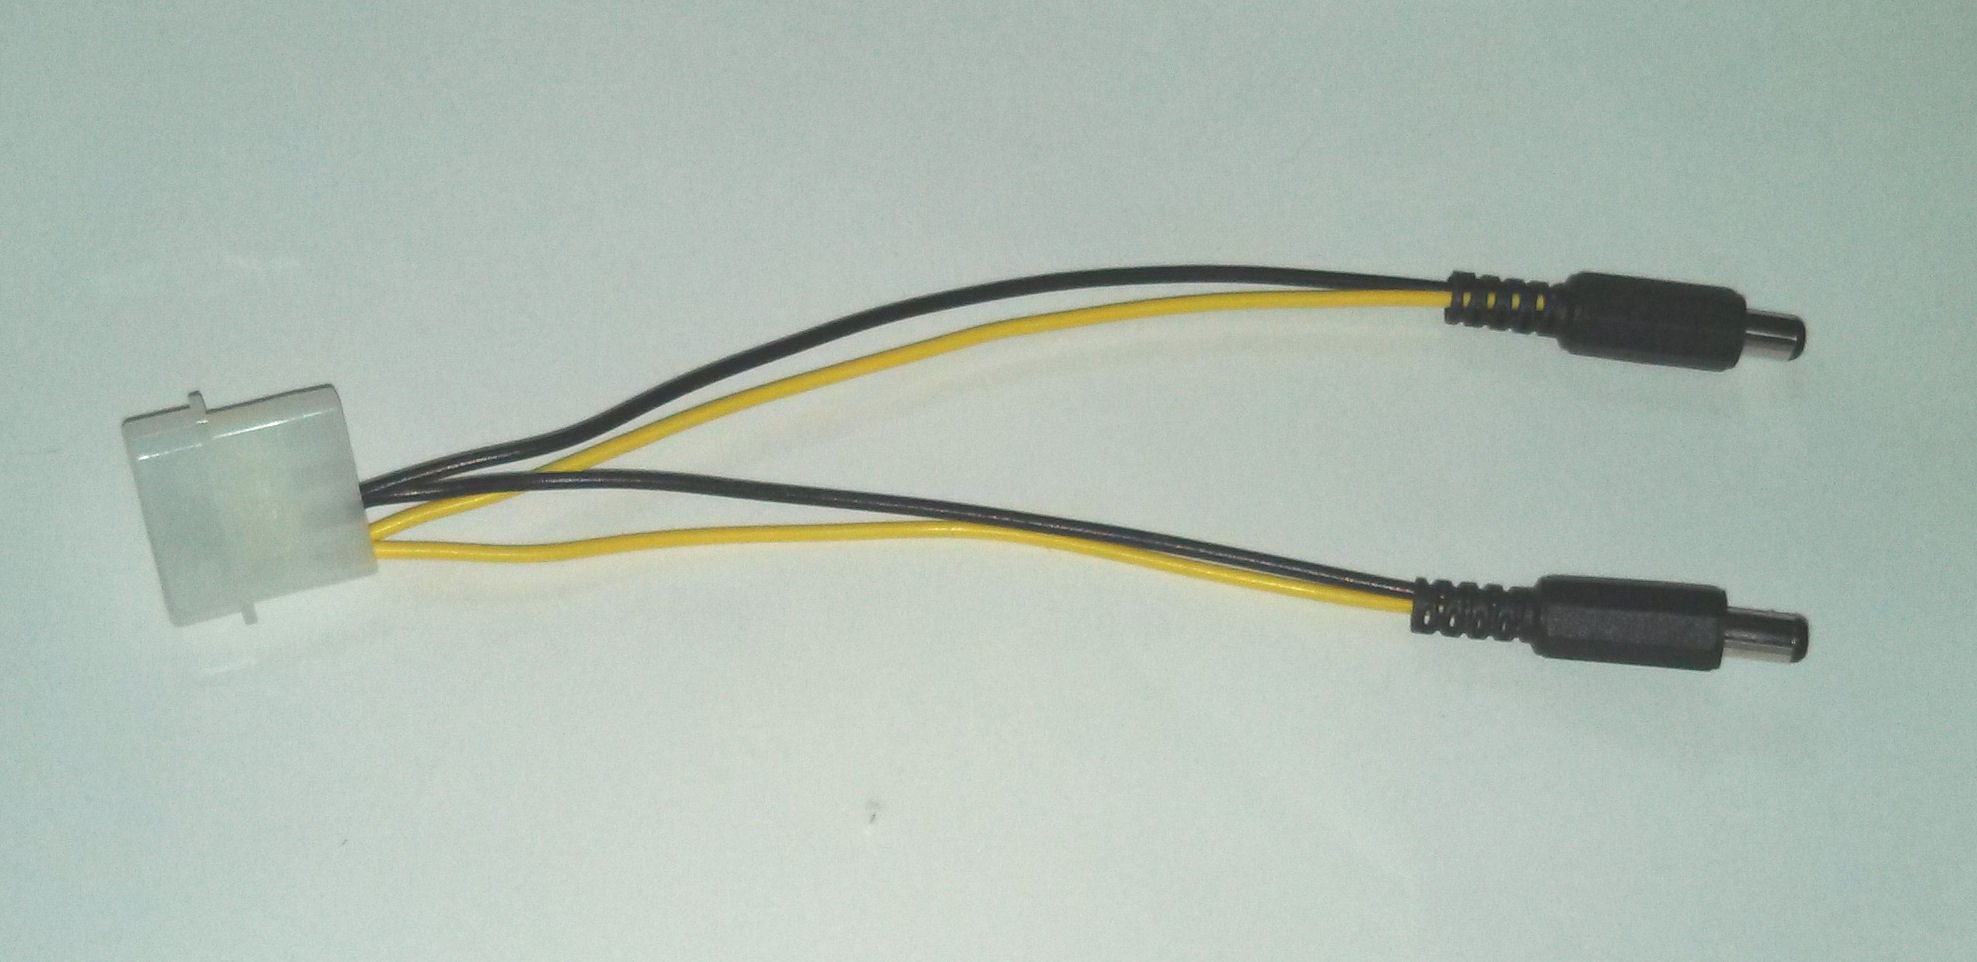 Gridseed / GAW Molex Power splitter - Click Image to Close